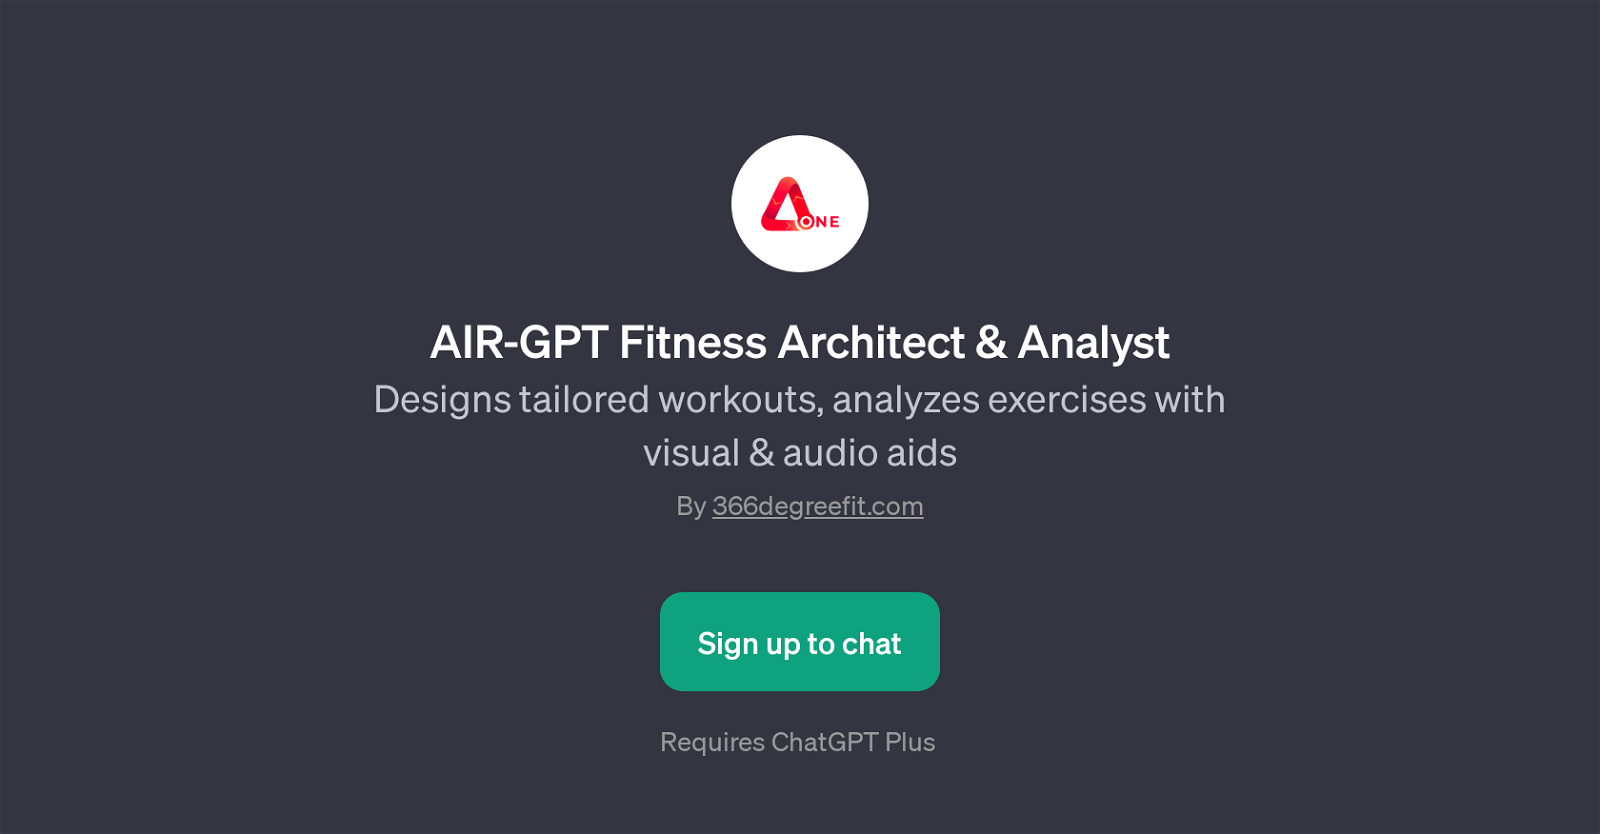 AIR-GPT Fitness Architect & Analyst website